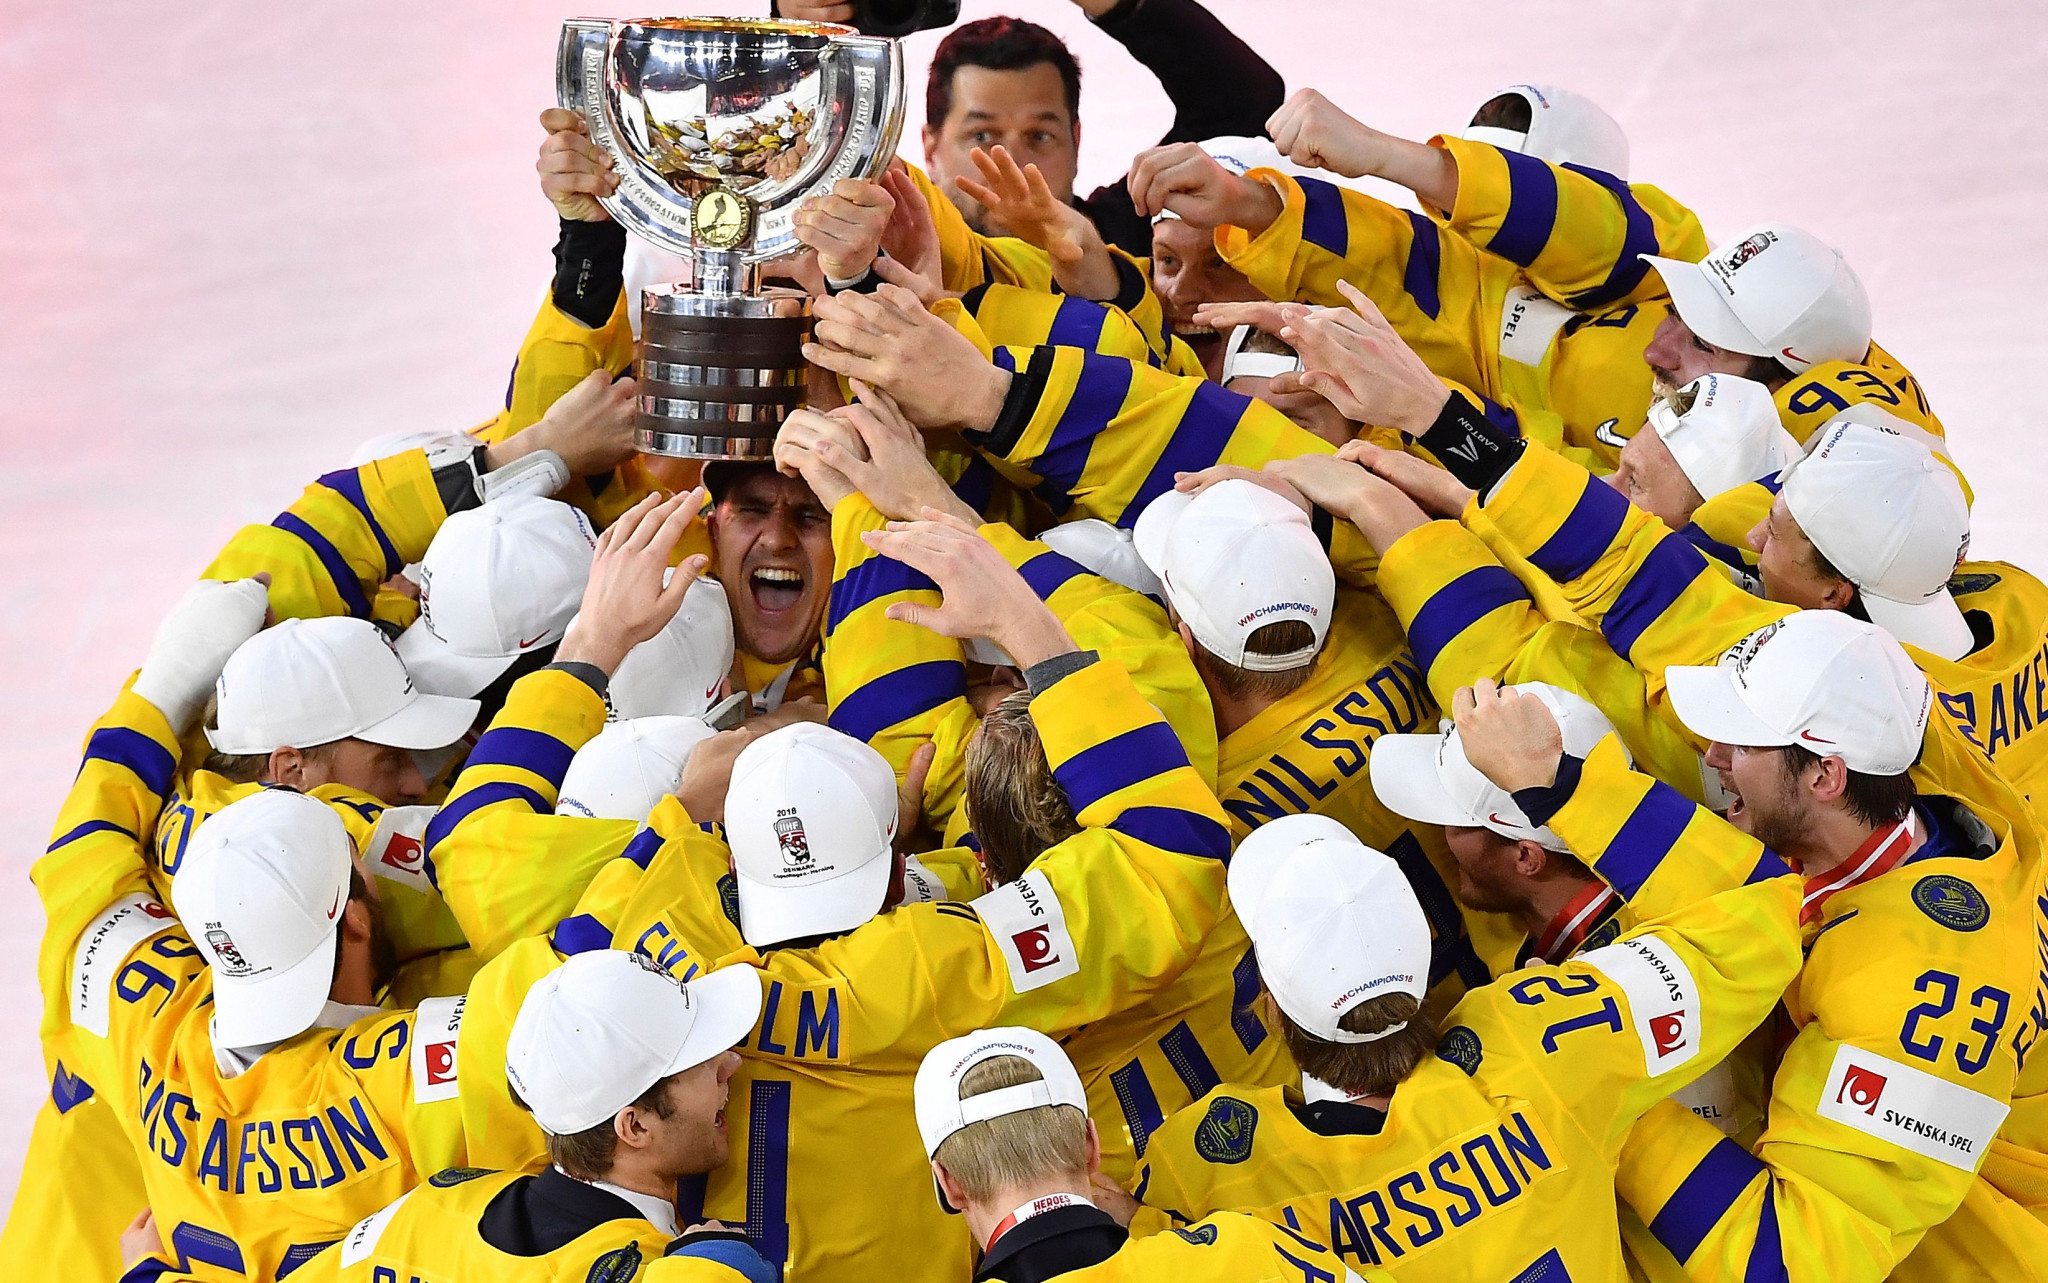 Infront claim the IIHF World Championship was the biggest event ever held in Denmark ©Getty Images